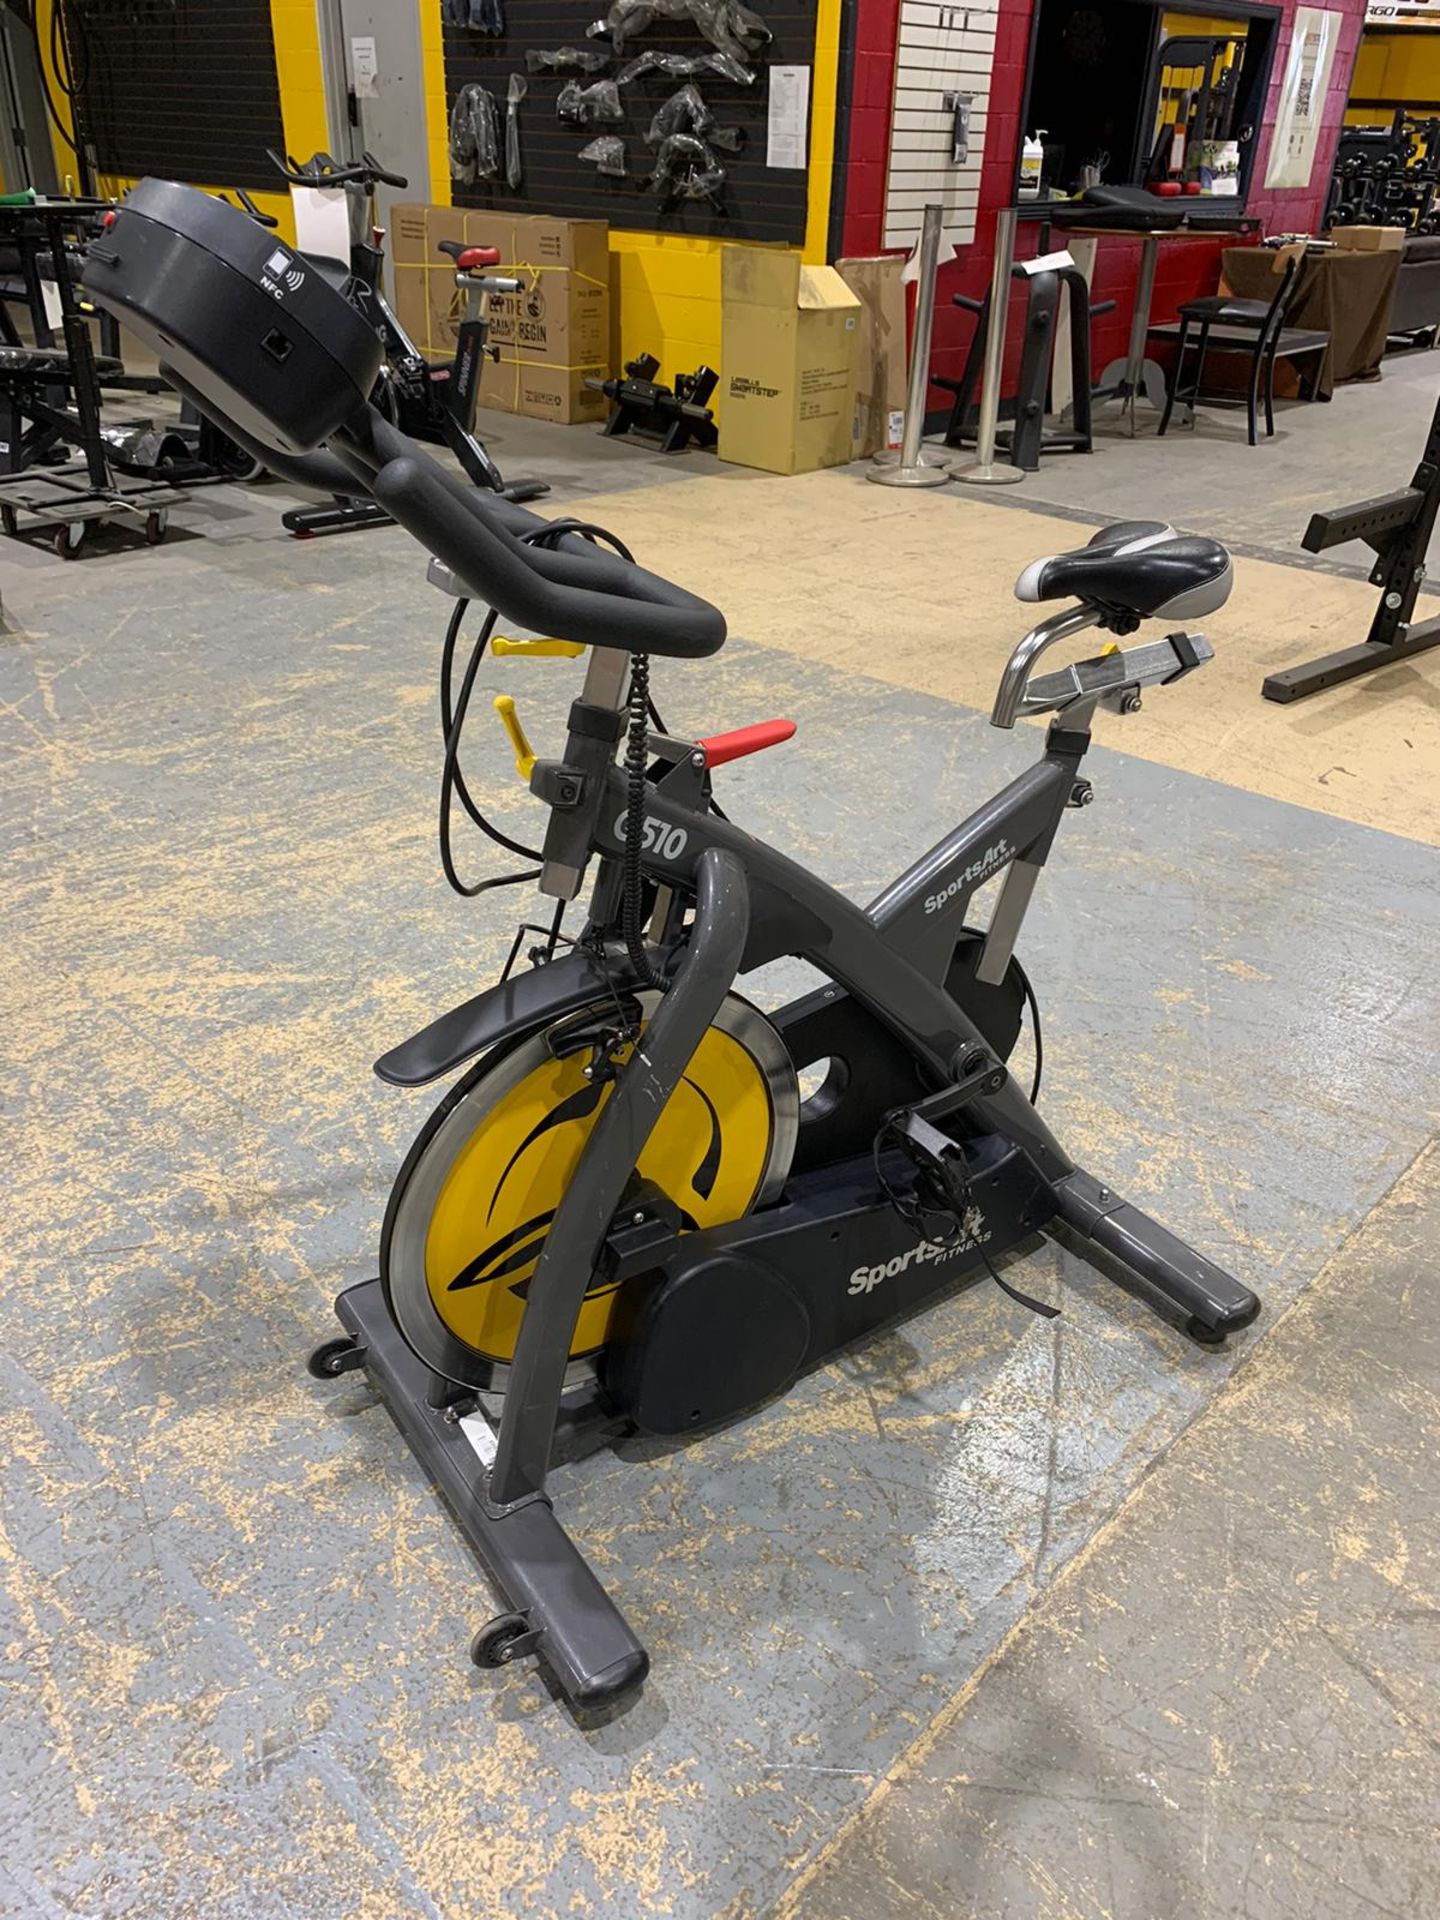 SPORTSART G510 INDOOR CYCLE MACHINE - Image 4 of 4